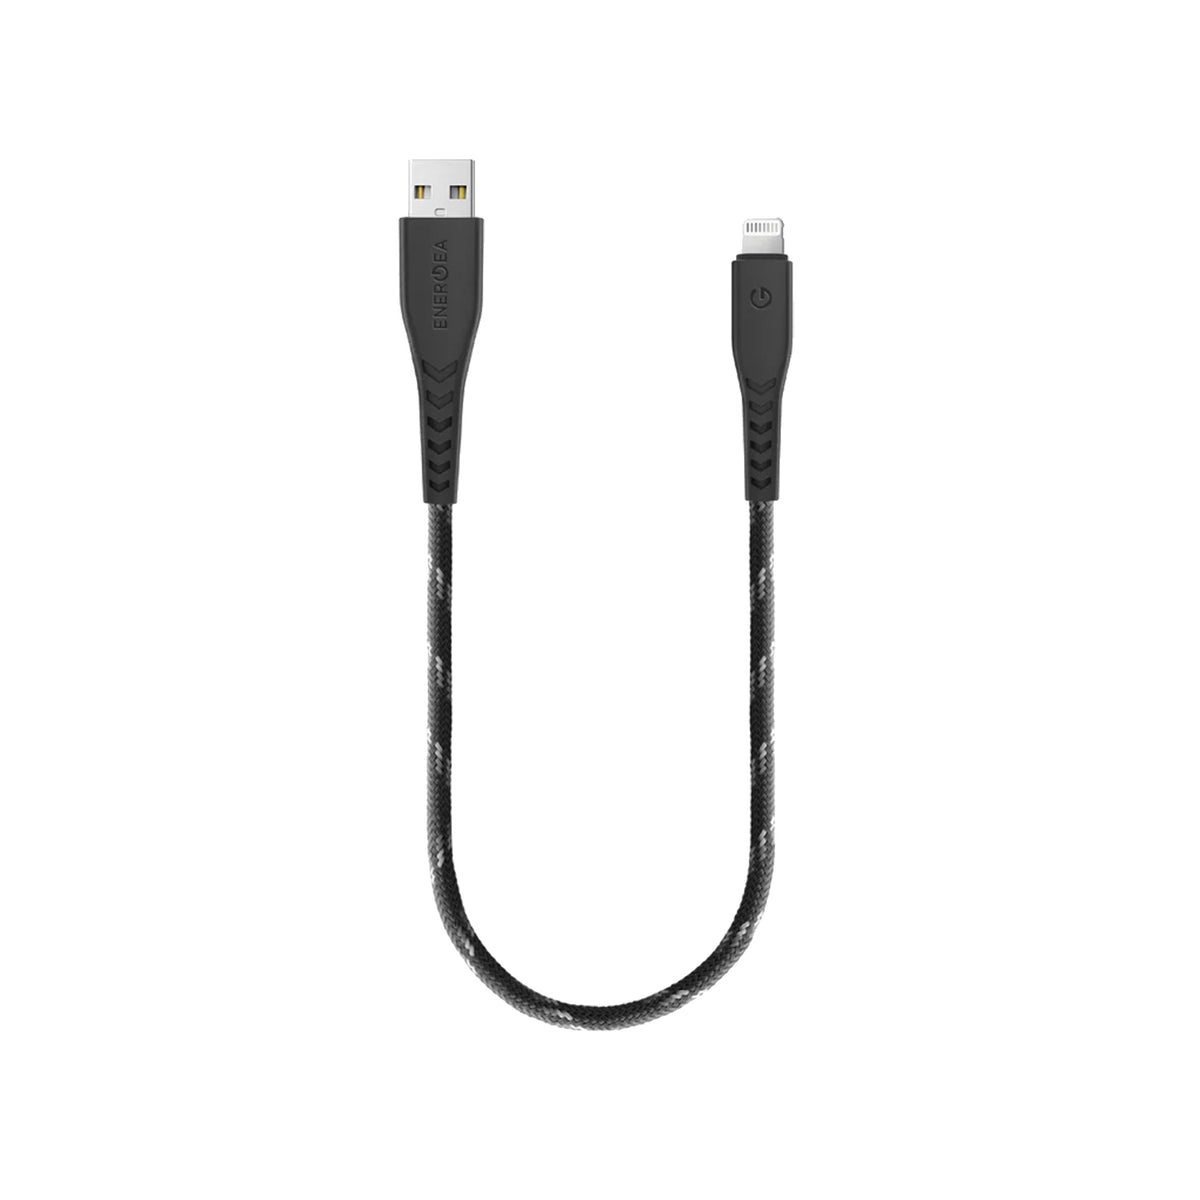 Energea NyloFlex LIghtning to USB-A Charging Cable with 3A High Speed Charge & Sync